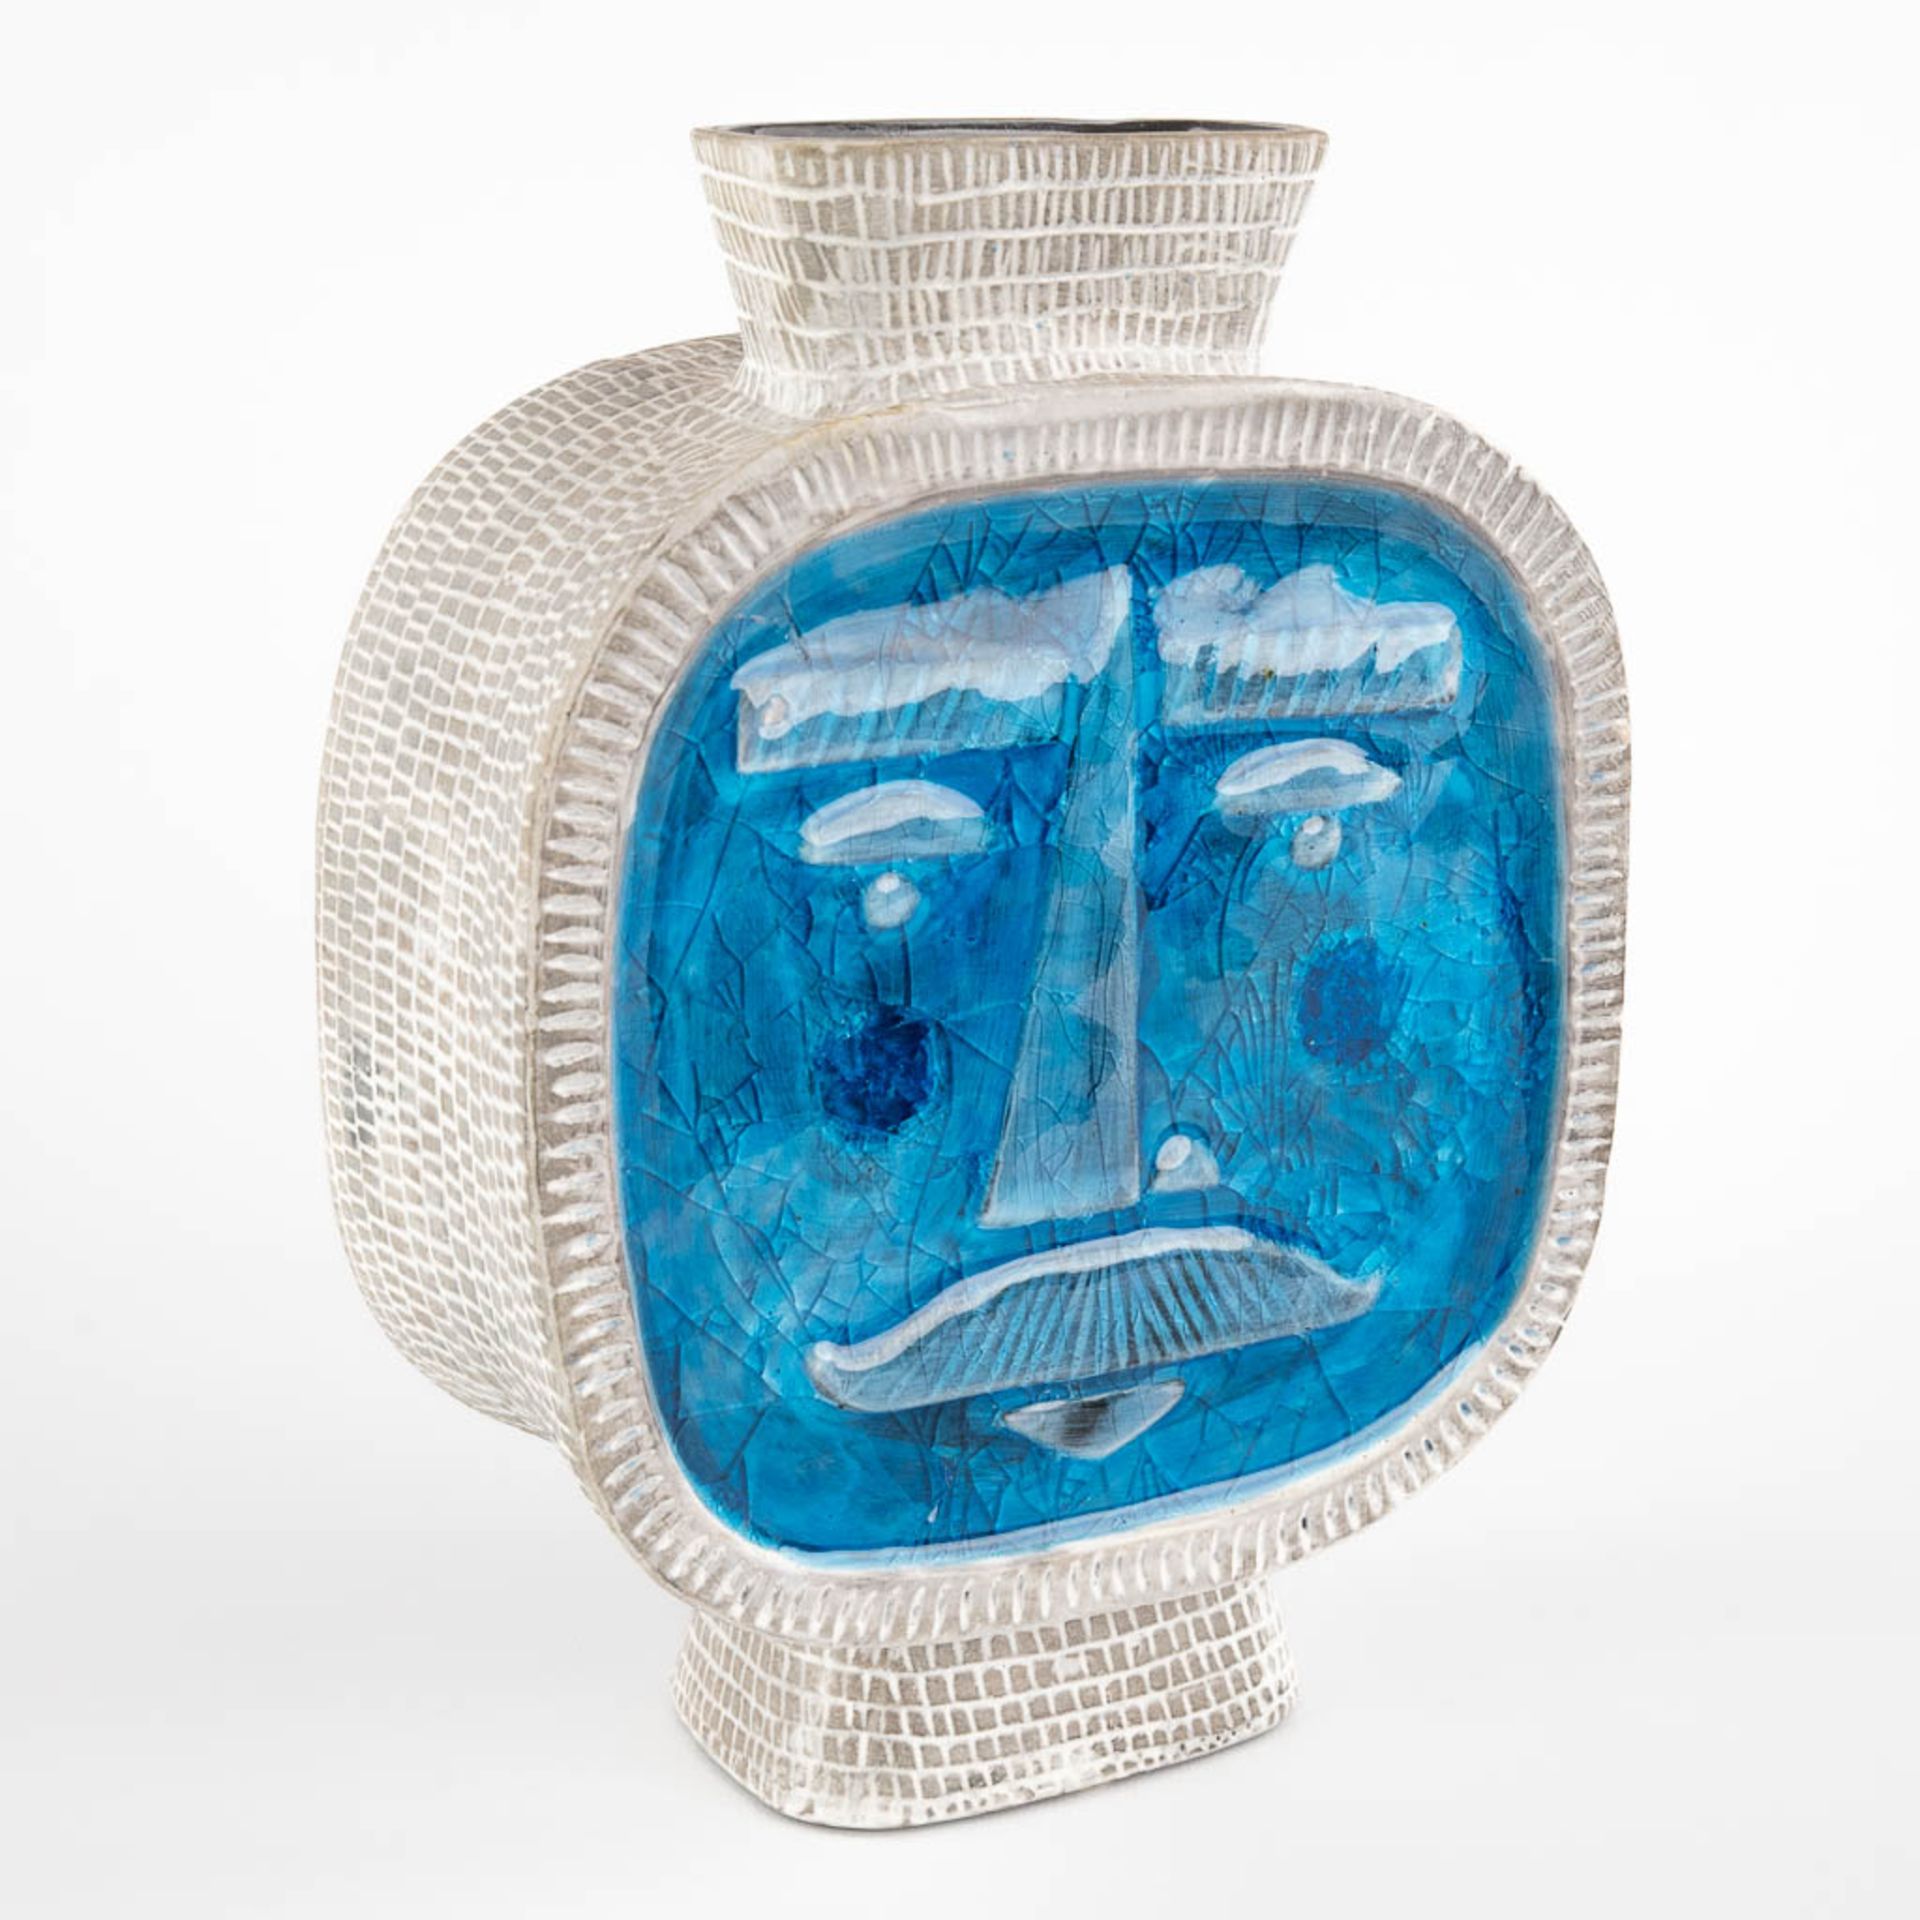 Jonathan ADLER (1966) 'Vase decorated with faces' glazed ceramics. (D:9 x W:18,5 x H:25 cm) - Image 3 of 12